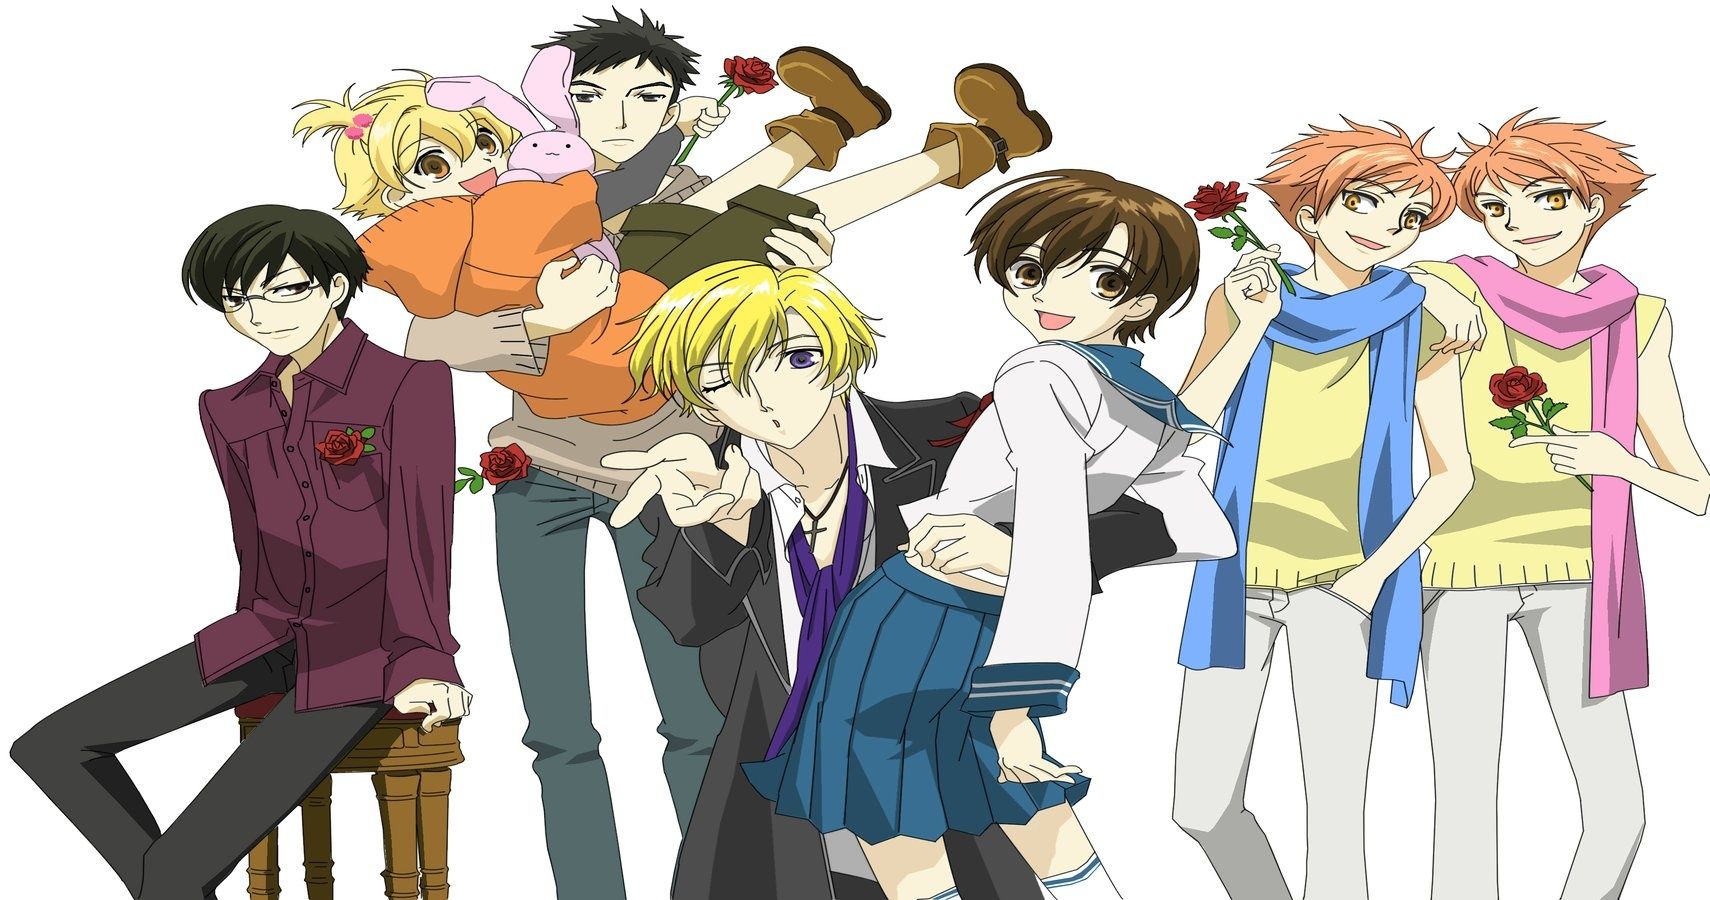 Ouran High School Host Club: The 10 Most Impactful Quotes From The Show